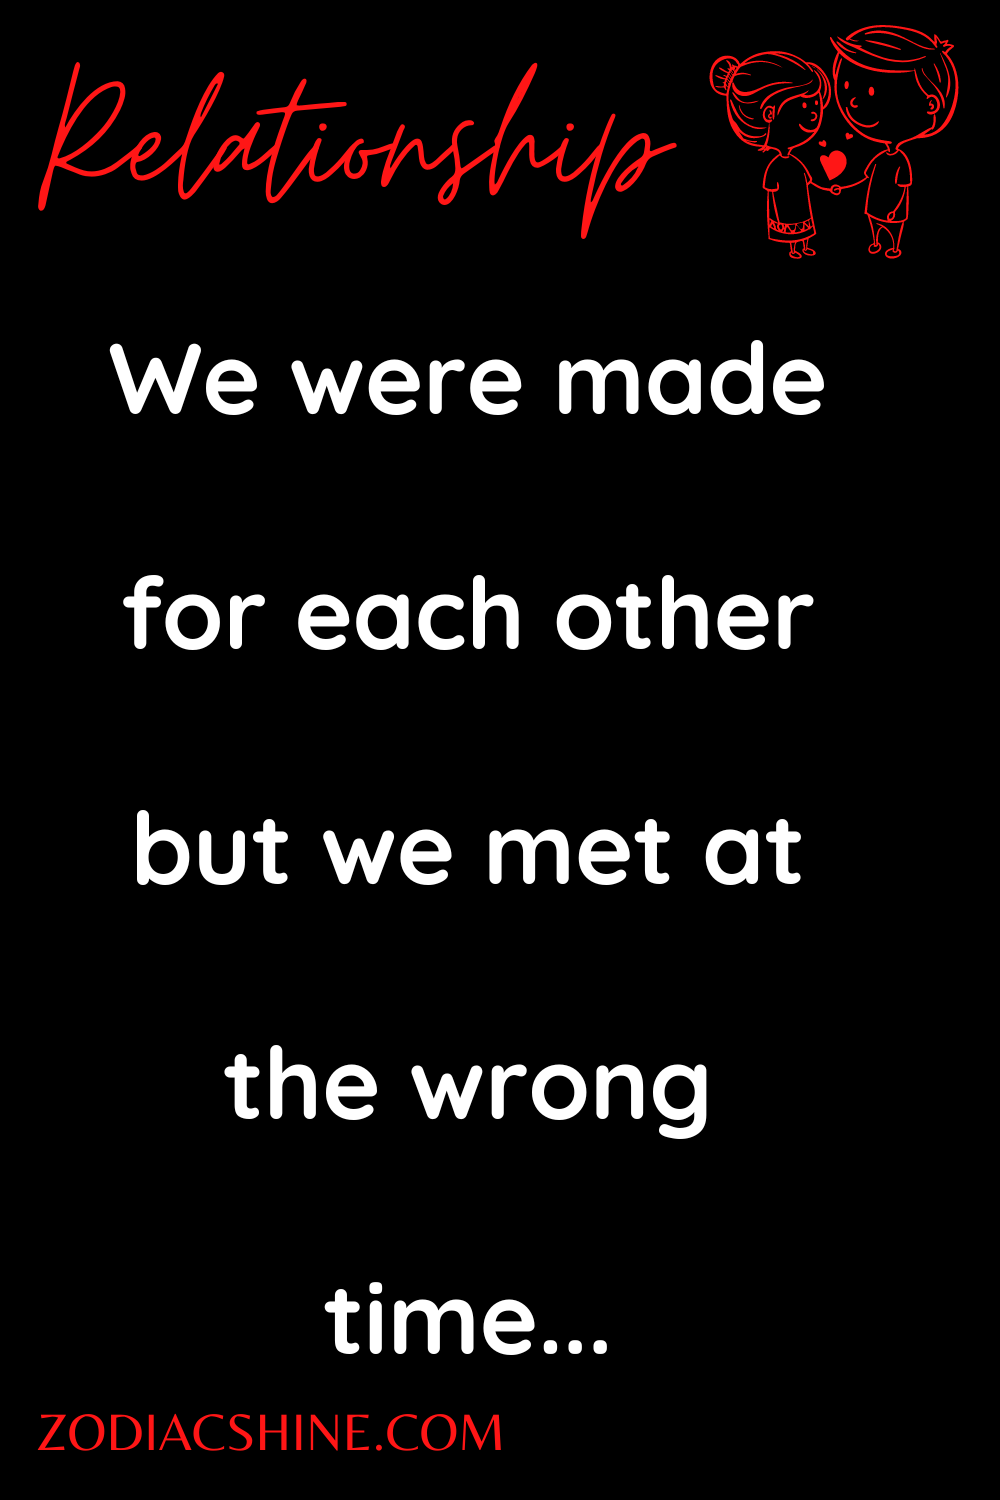 We were made for each other but we met at the wrong time...